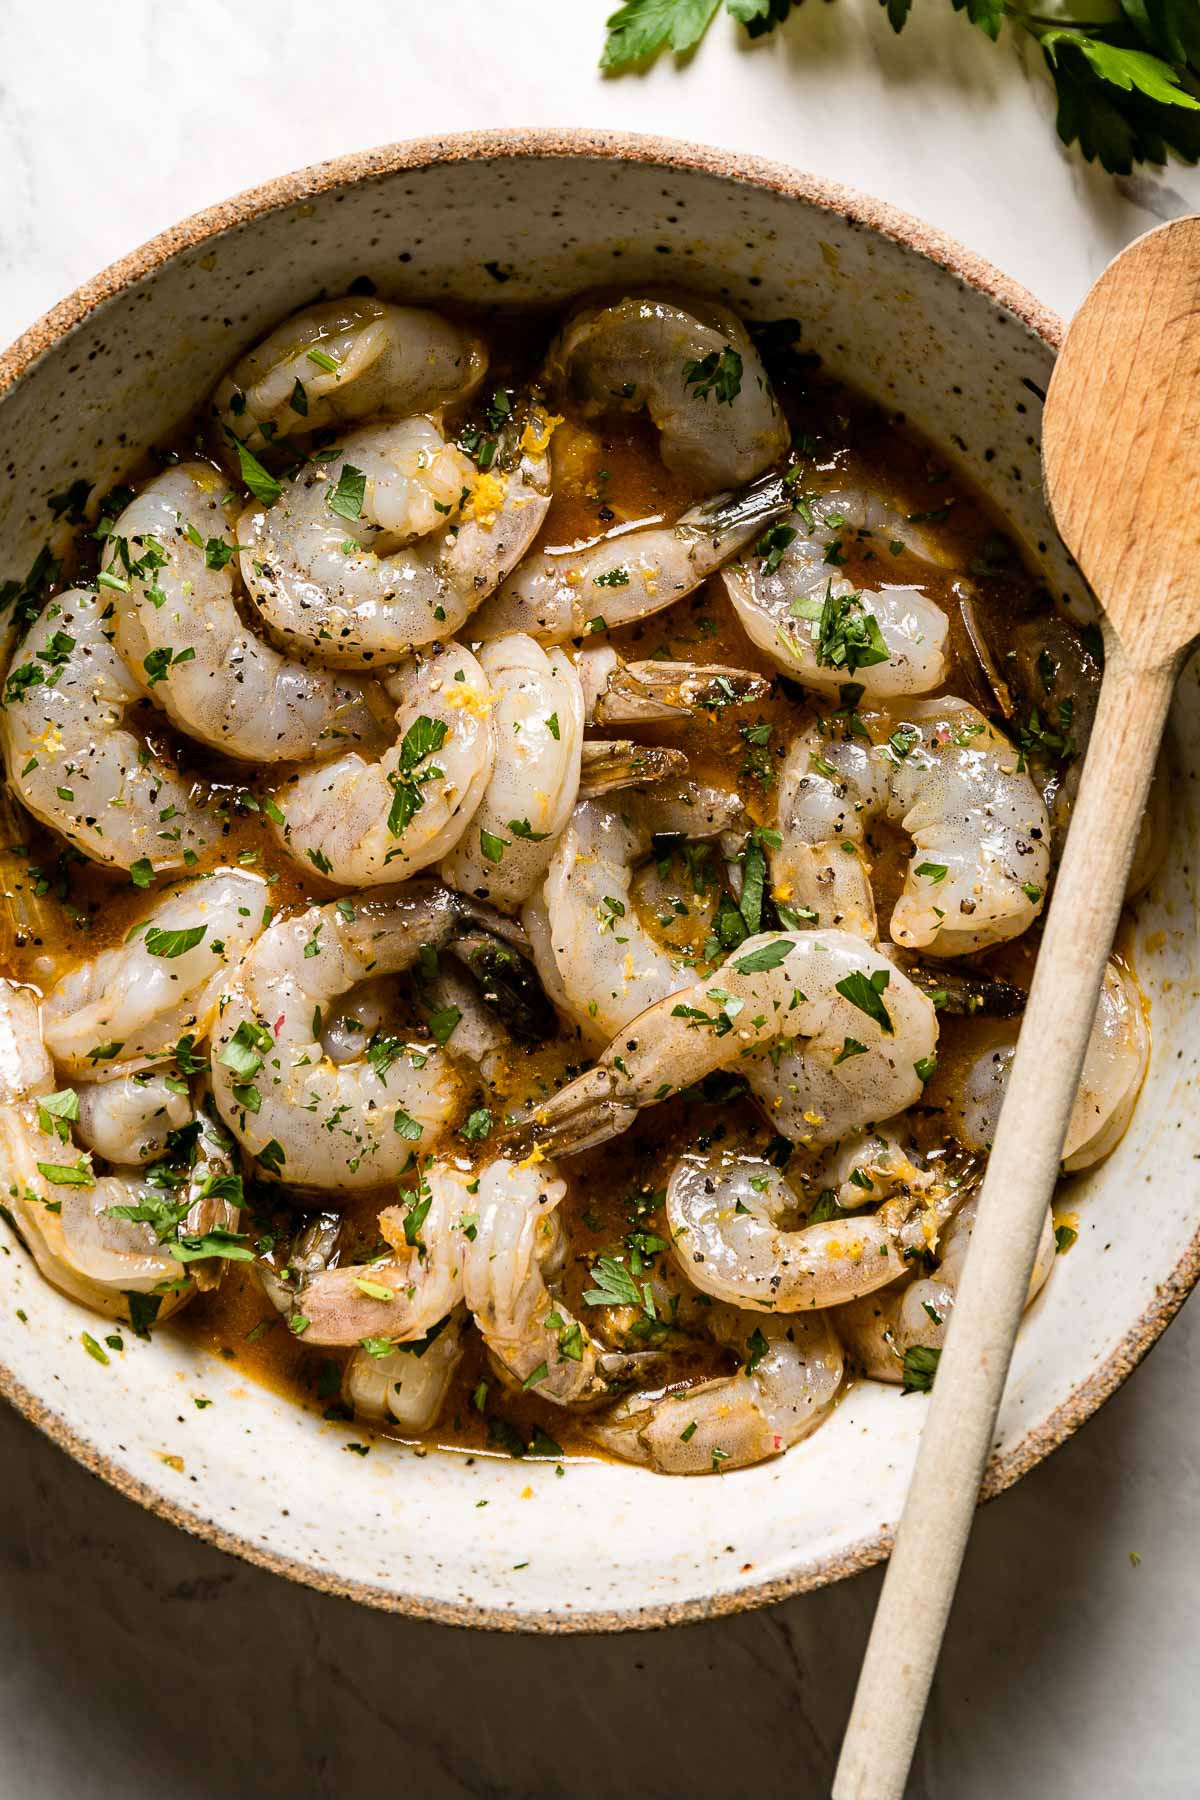 Grilled shrimp marinade in a bowl with a wooden spoon on the side